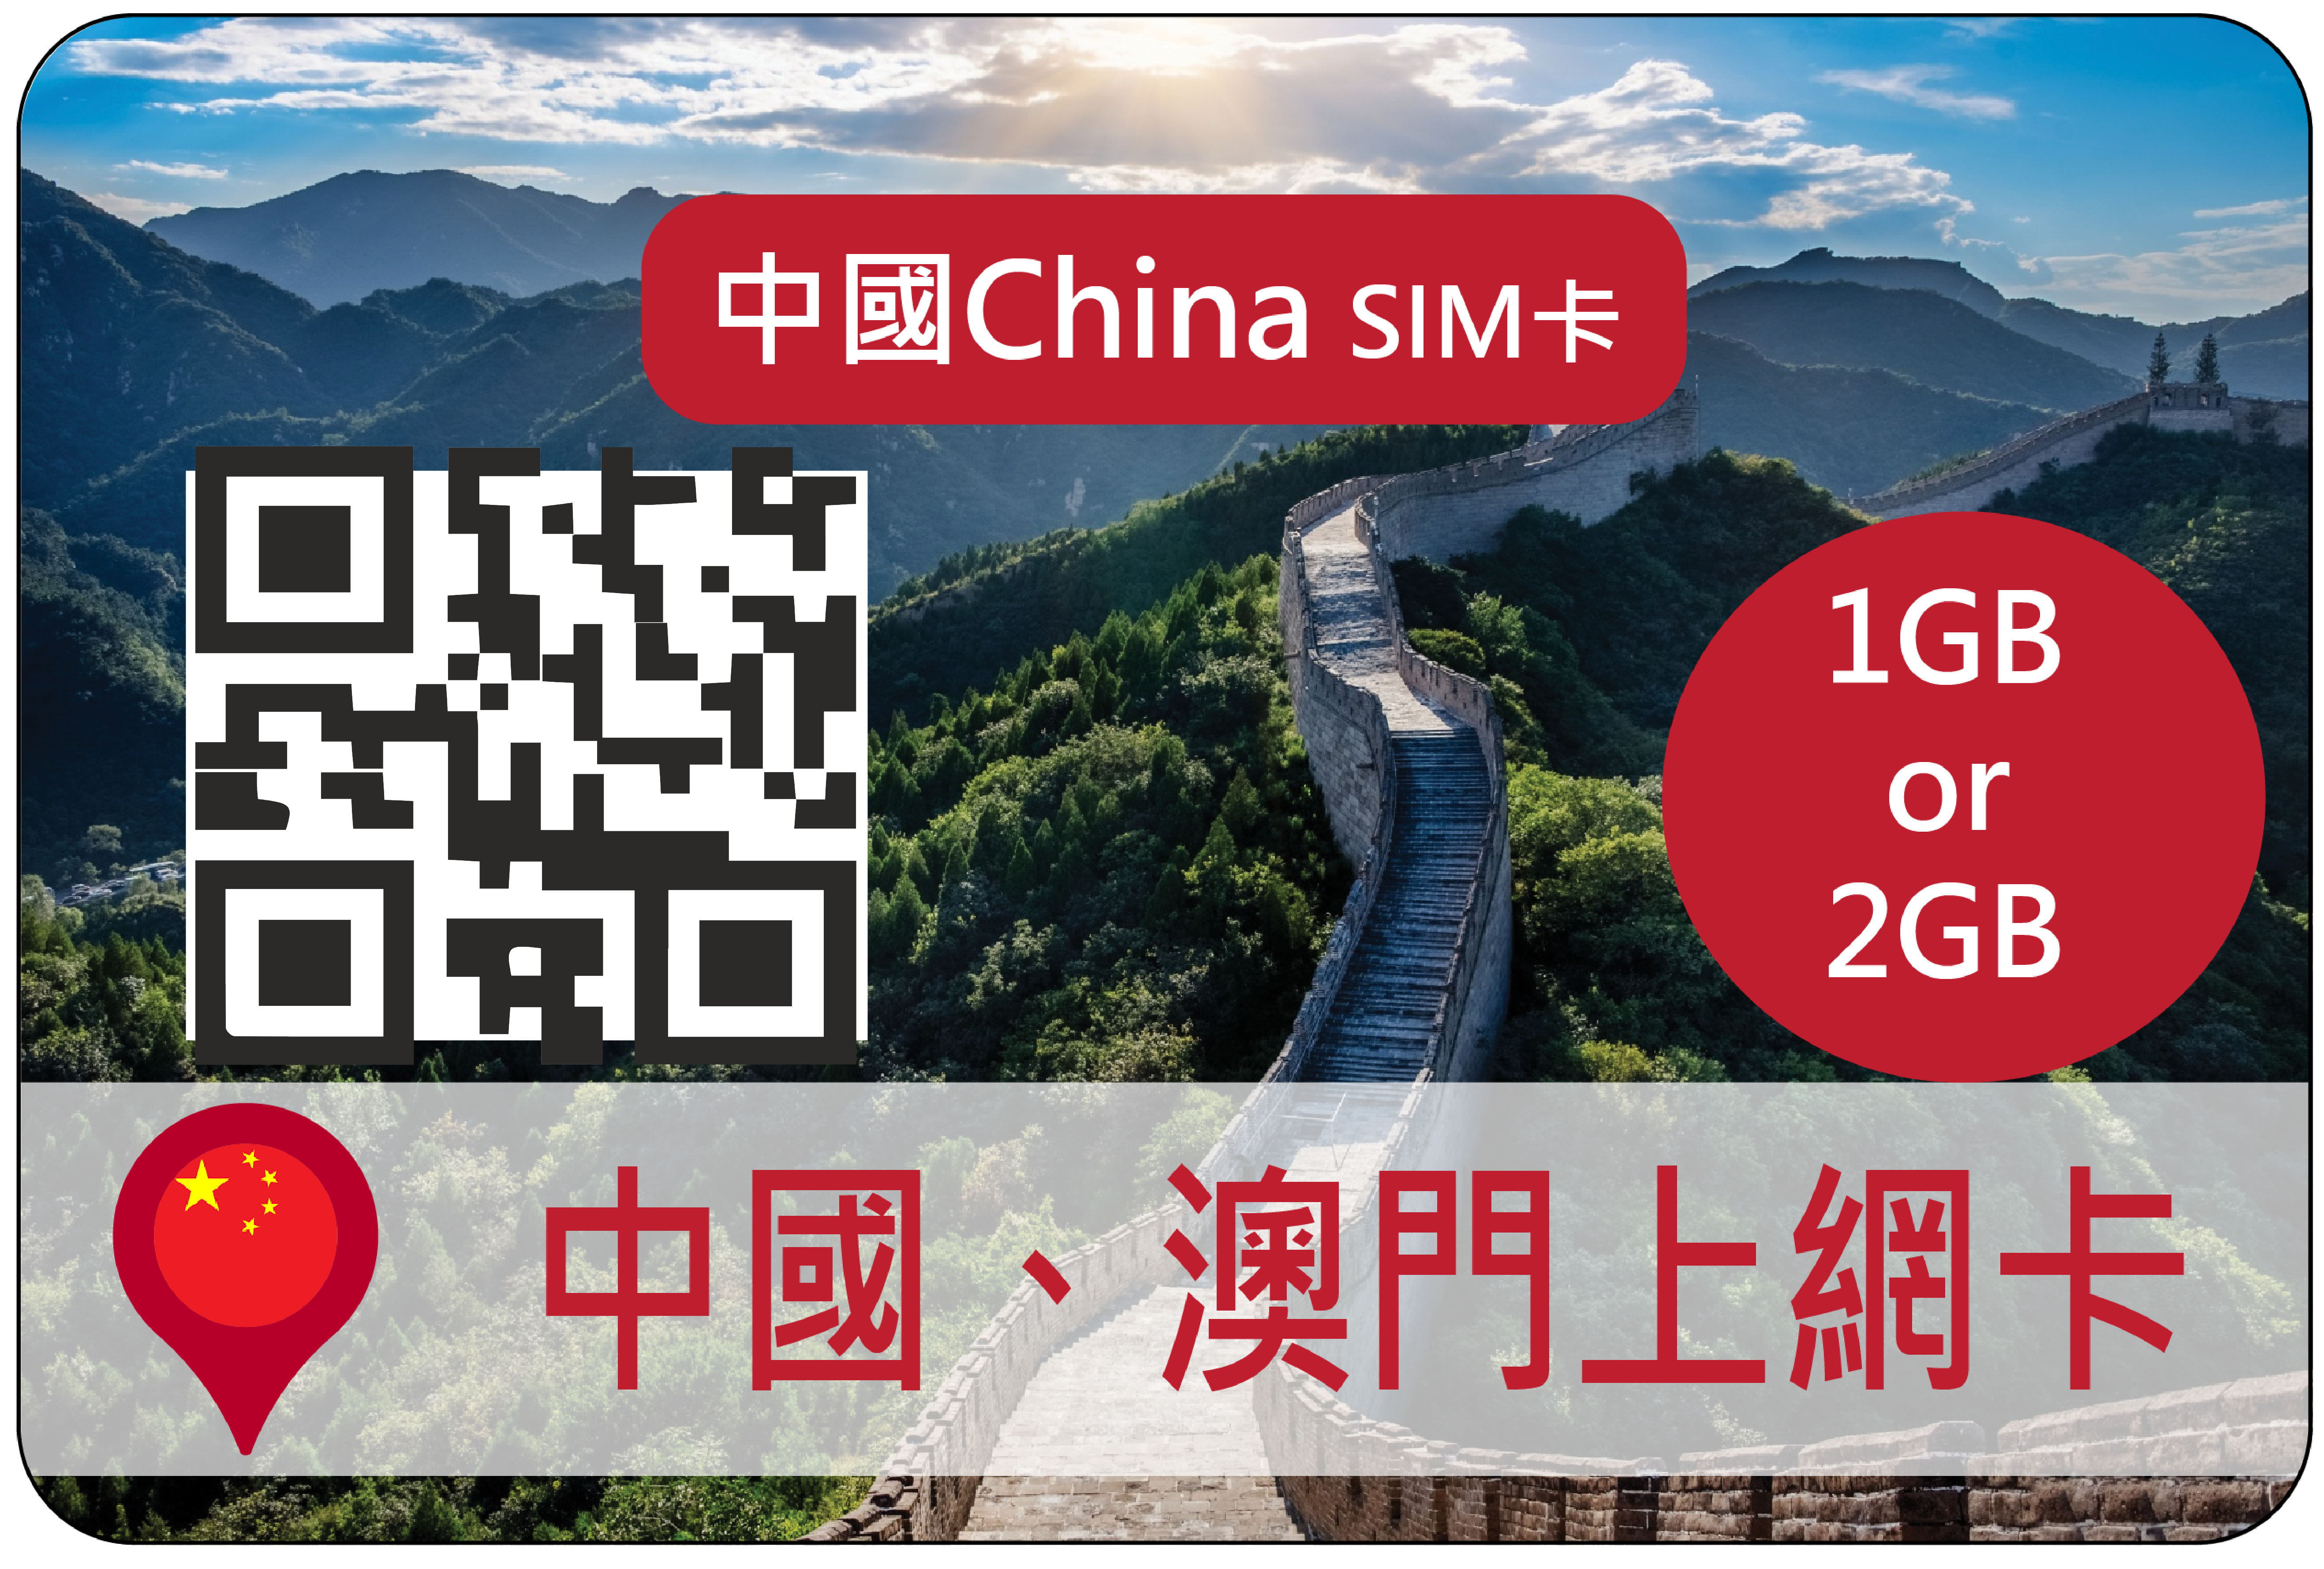 China 1GB/2GB  by Day DATA SIMunlimited high speed data sim